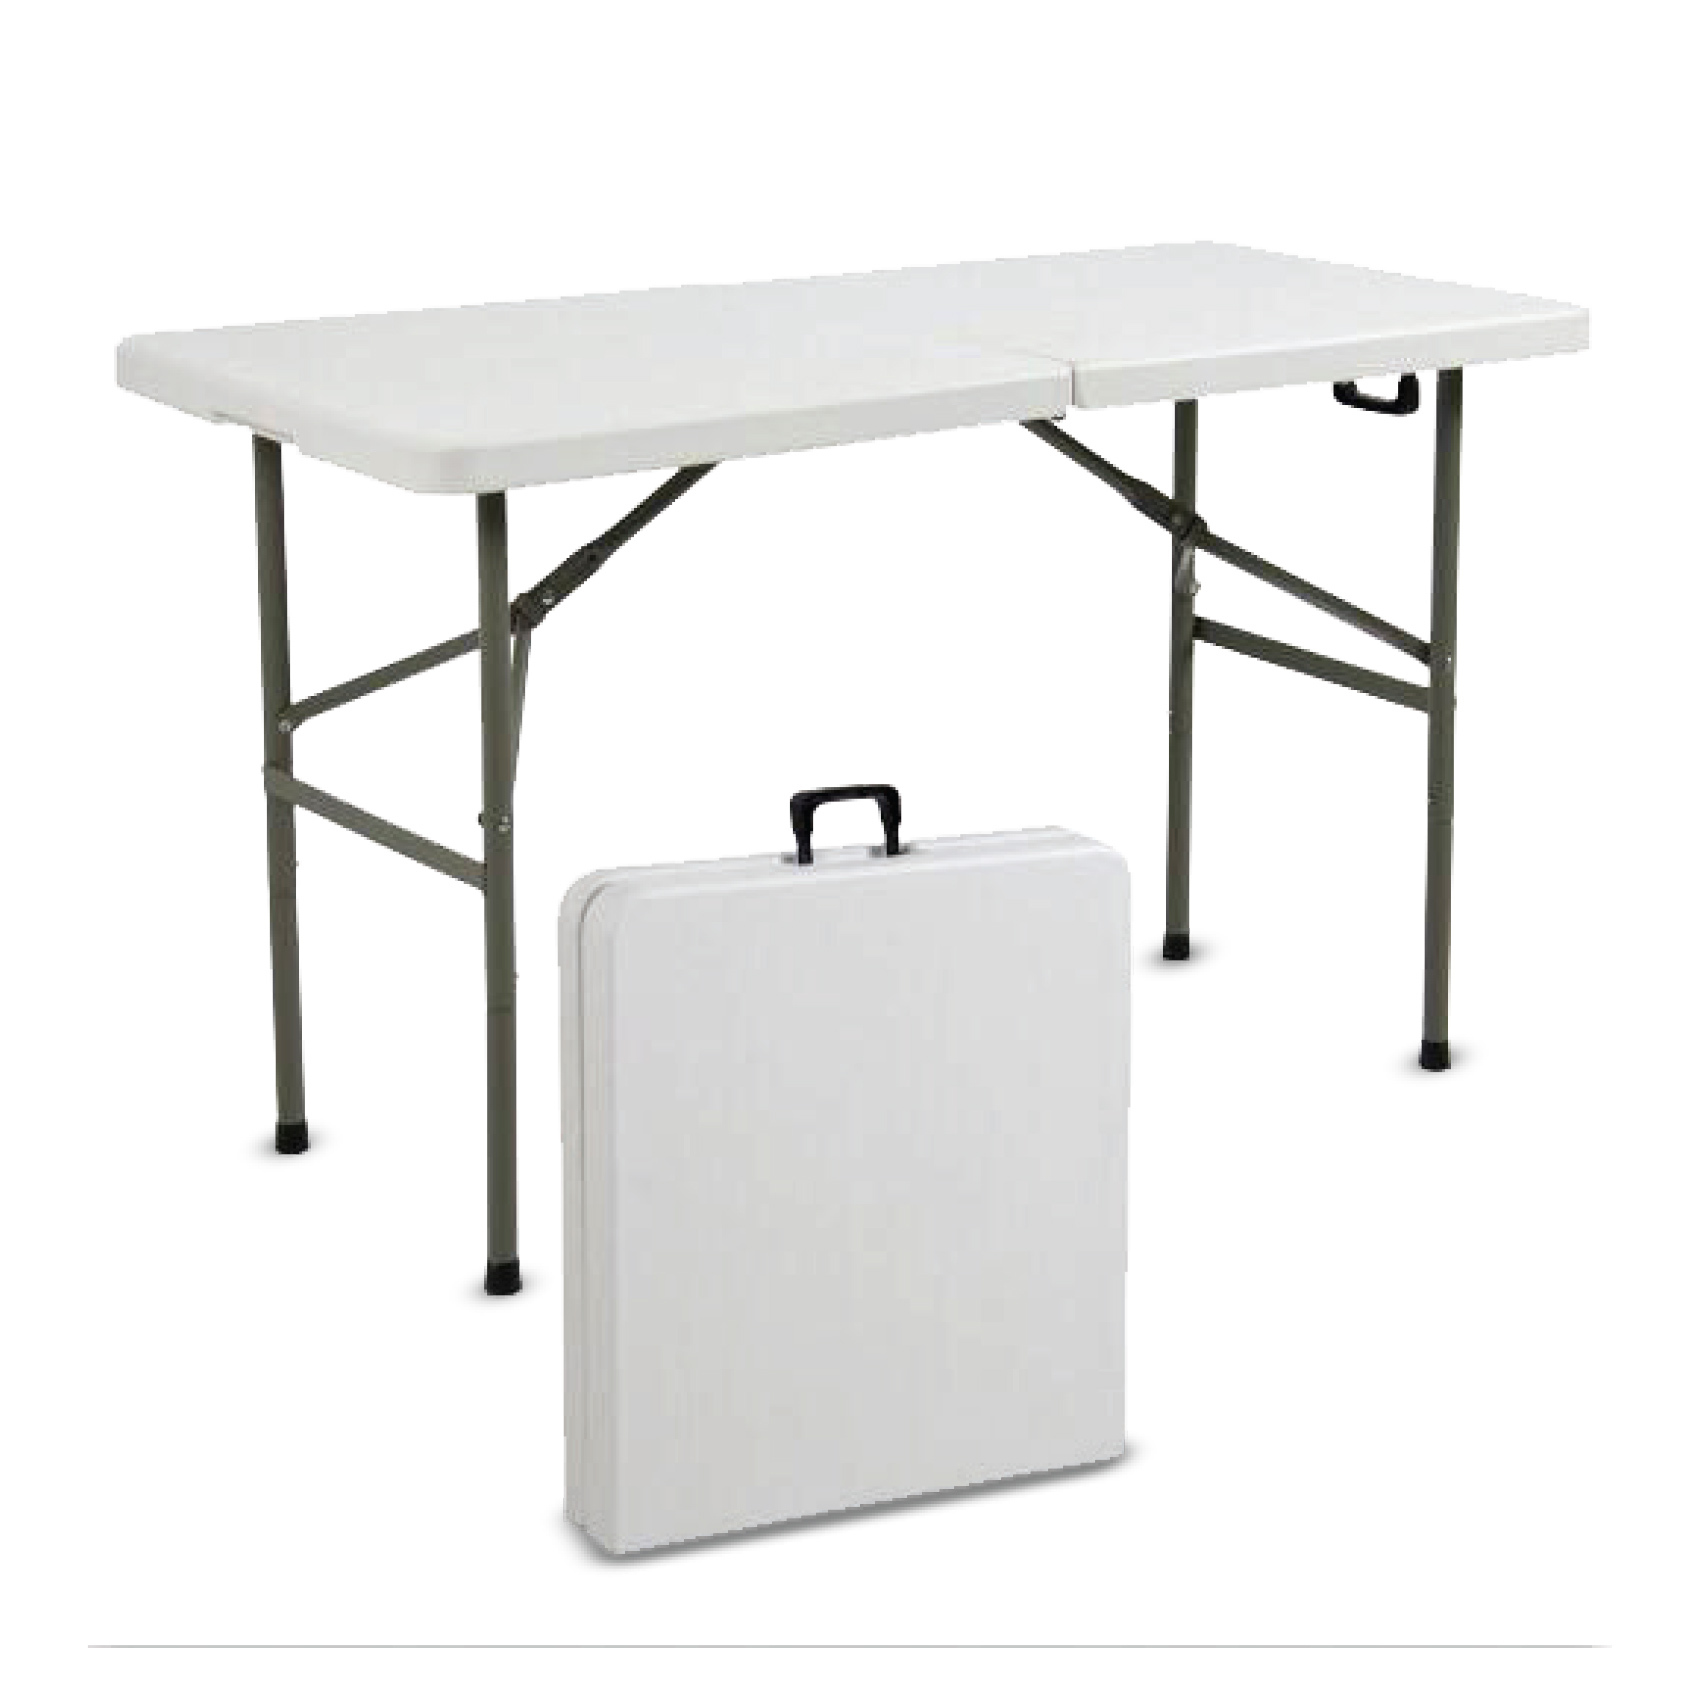 Buy Hdpe Rectangle Table 183 Times 74 Cm Online Shop Home Garden On Carrefour Saudi Arabia